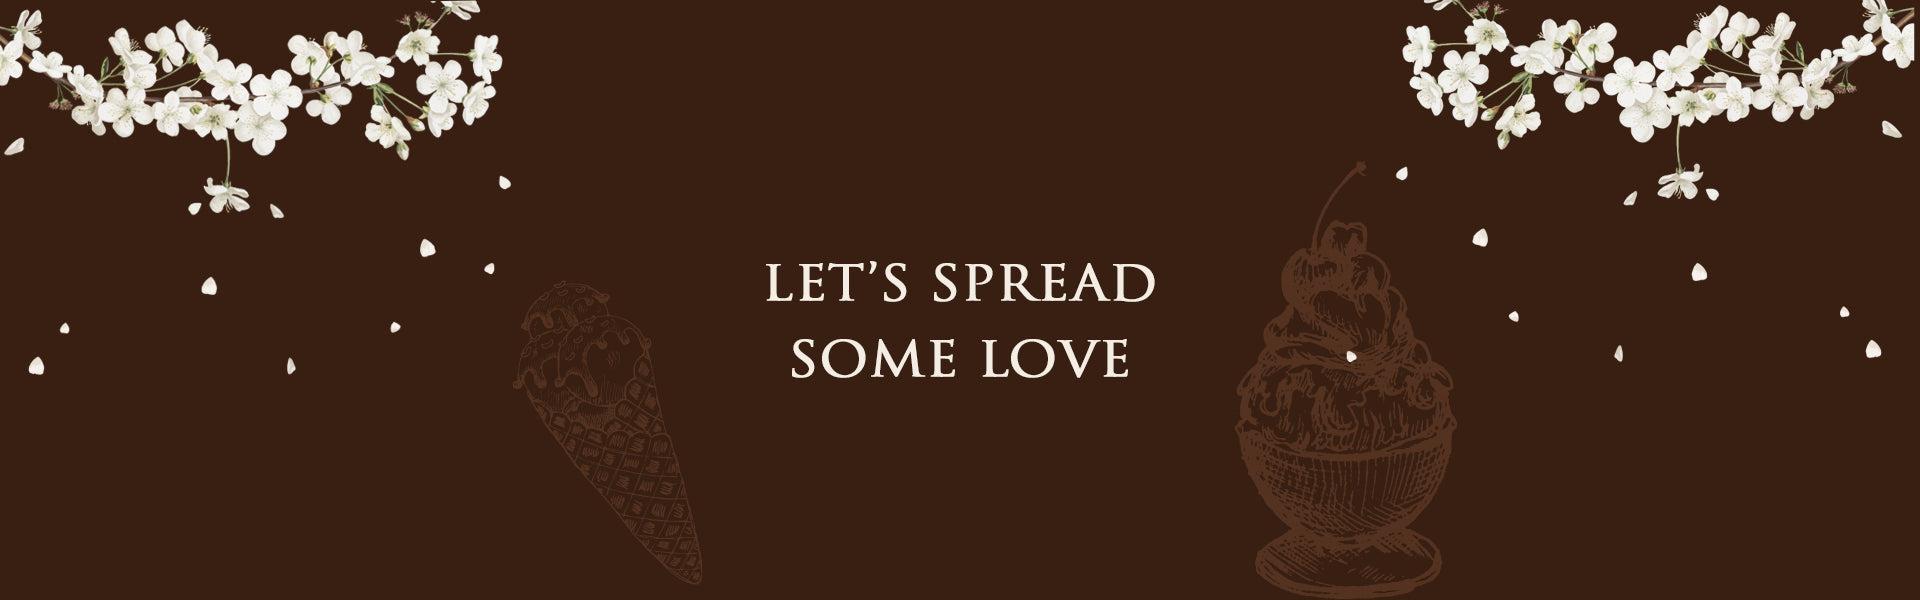 Ice cream spreads love far and wide, with the help of Amore.